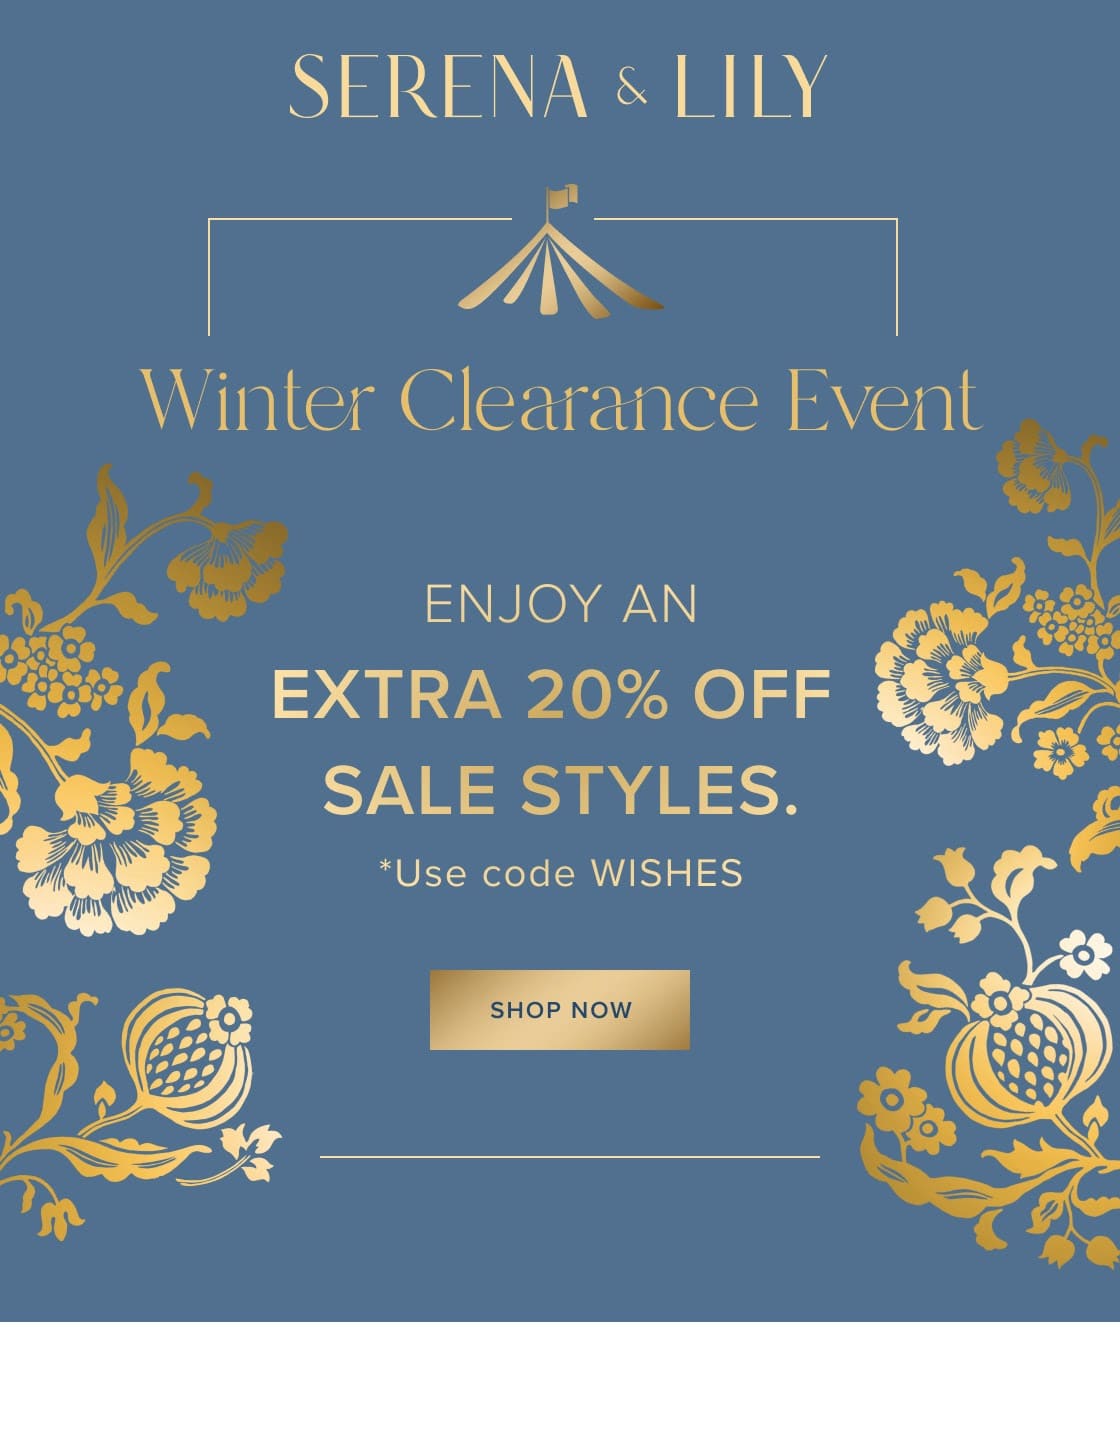 EXTRA 20% Off Sale Styles -serena & lily